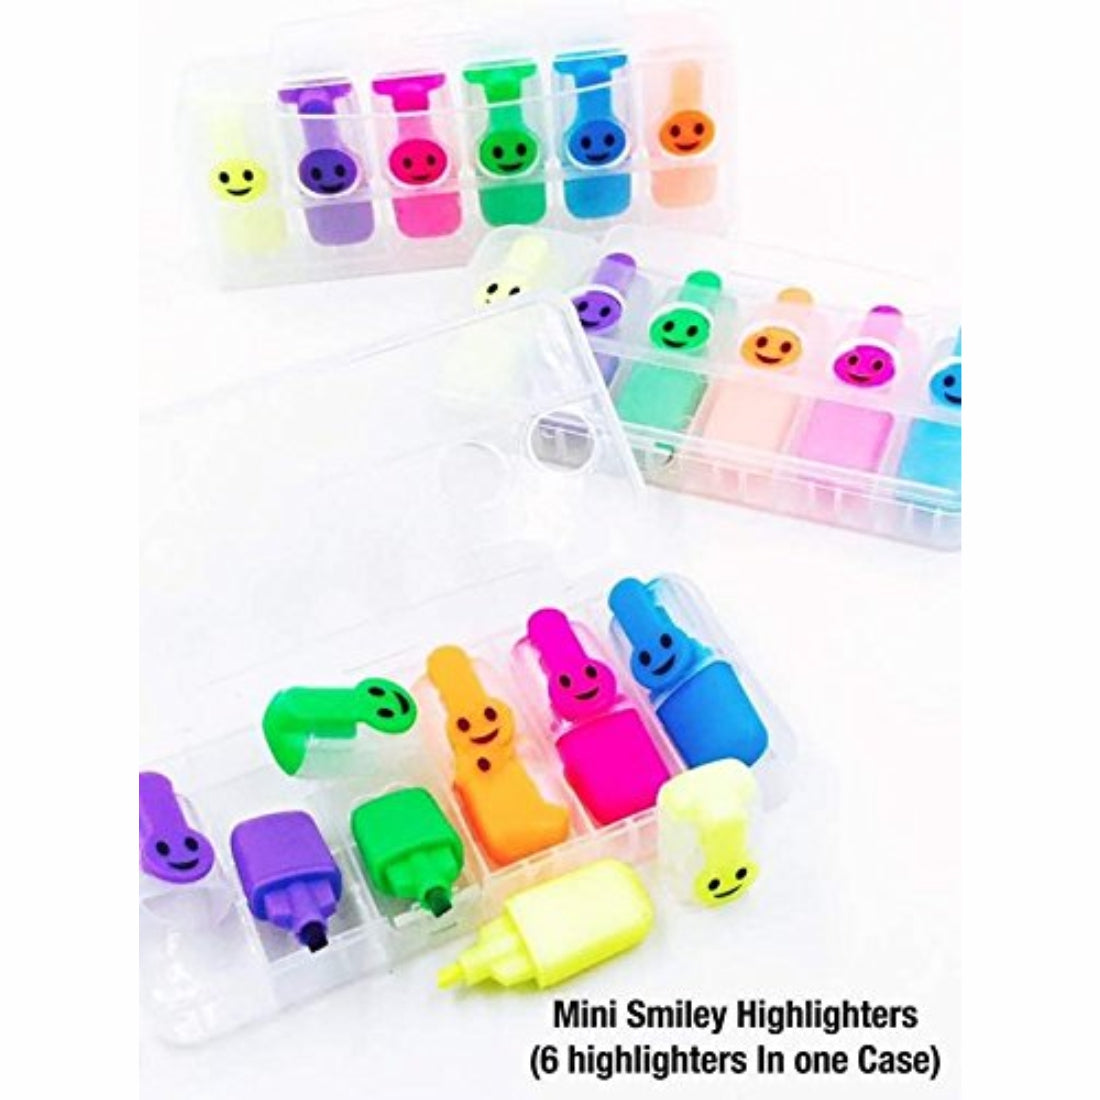 Mini Smiley Highlighters